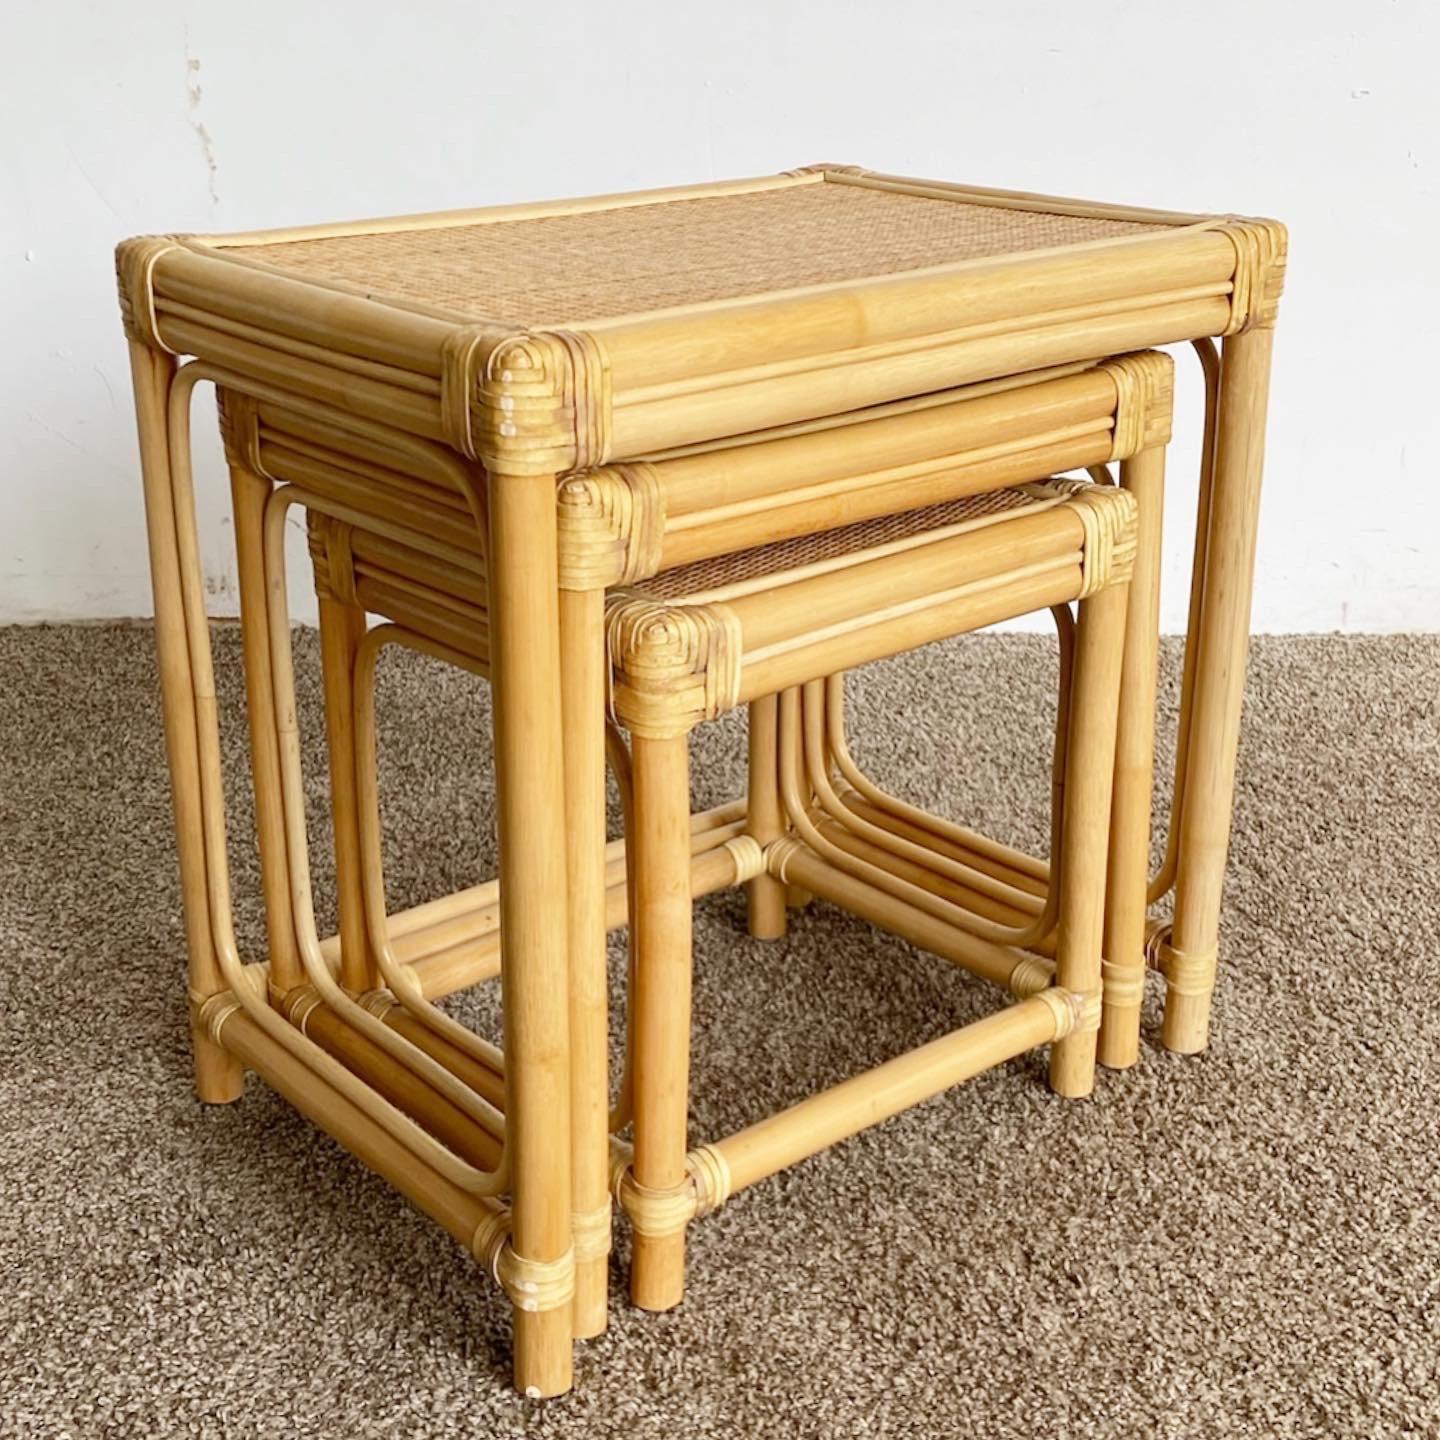 Boho Chic Bamboo Rattan and Wicker Nesting Tables, Set of 3 For Sale 1